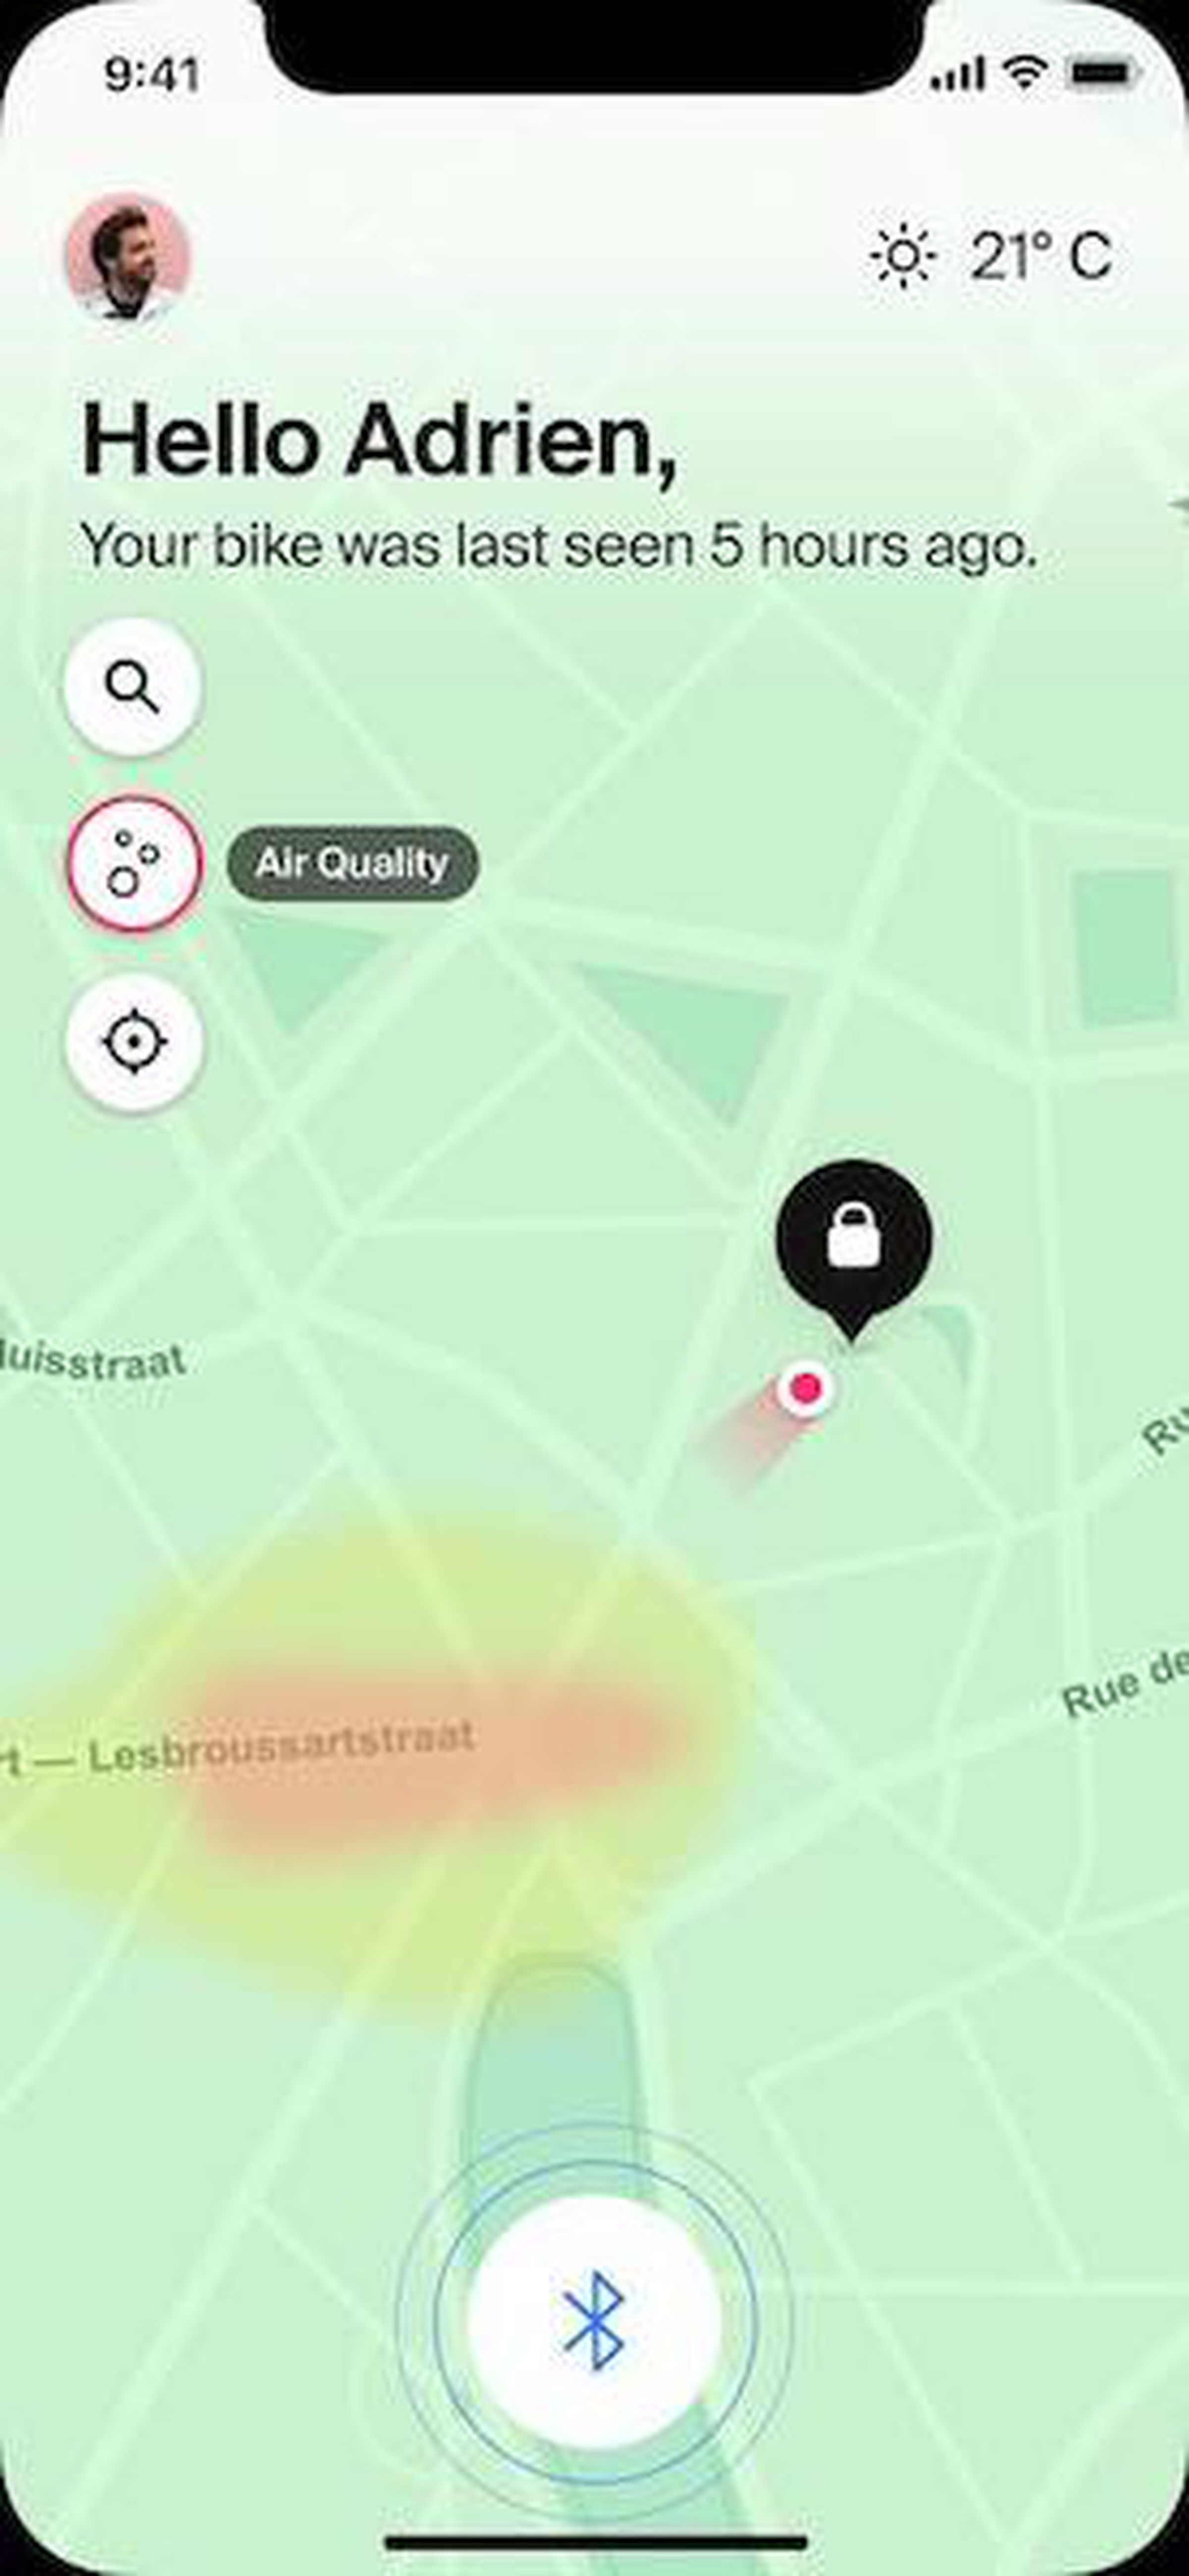 New feature will route you around areas of poor air quality.